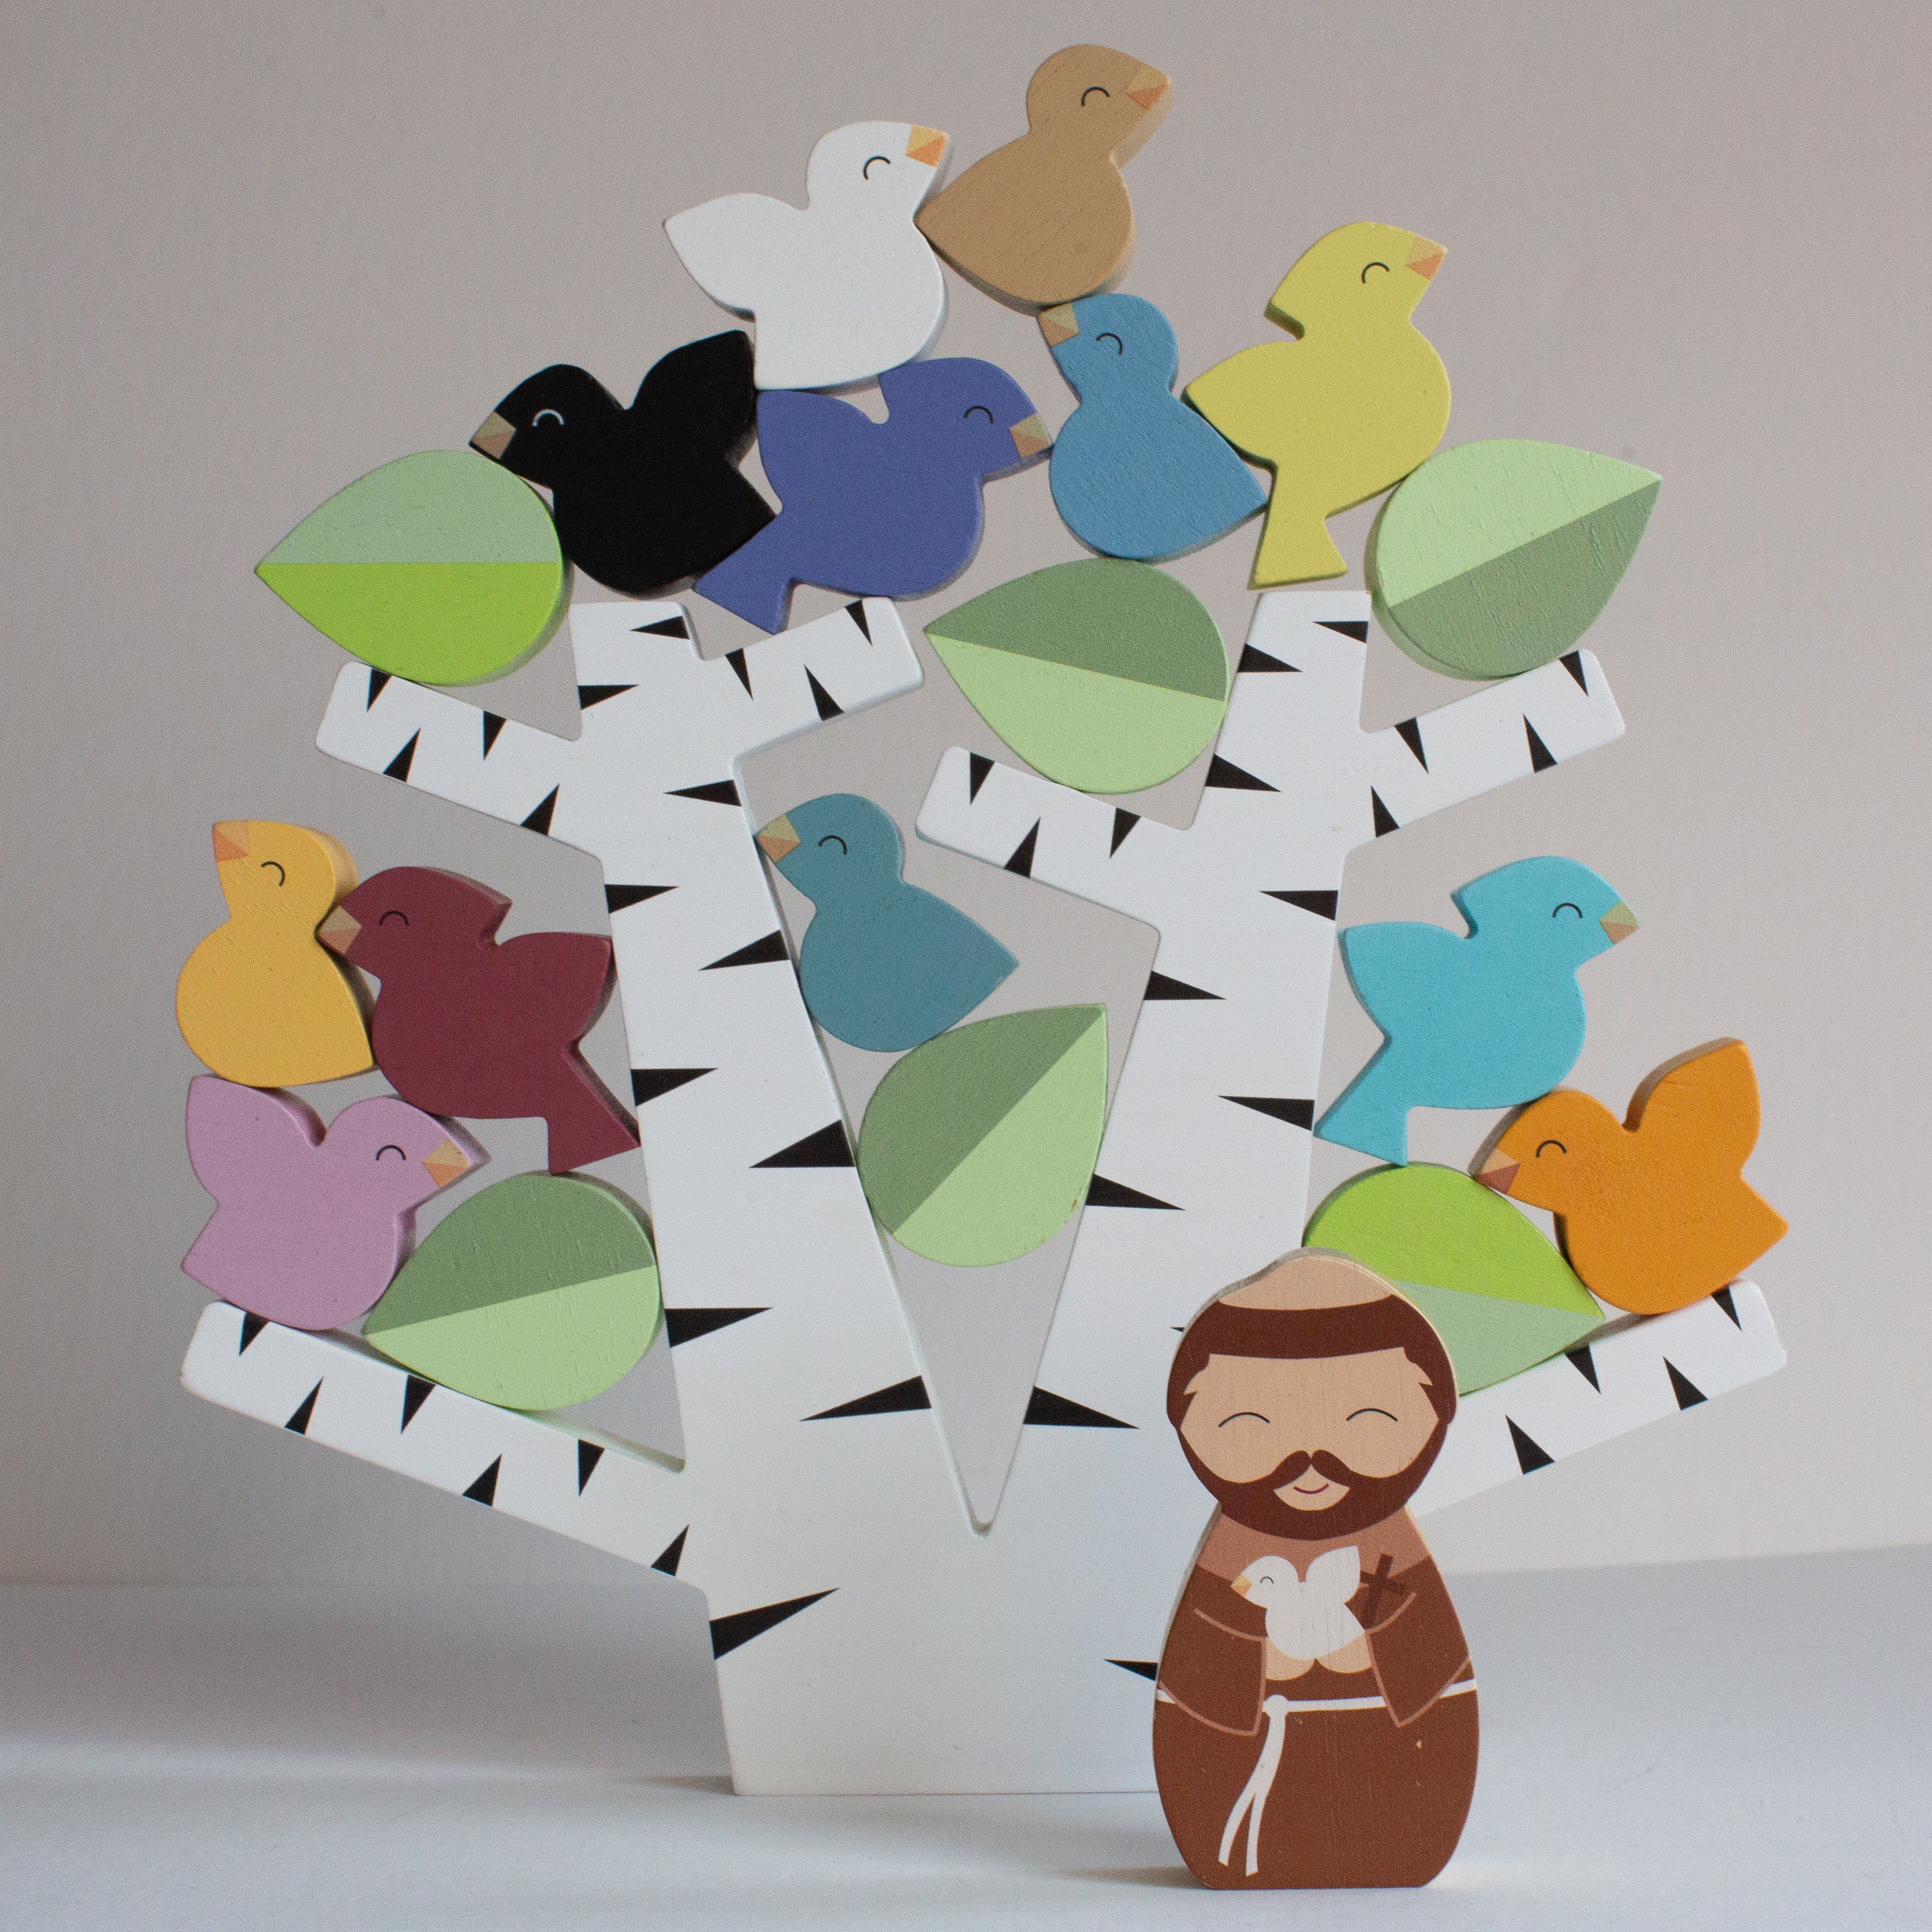 St. Francis Preaches To The Birds Wooden Stacking Toy